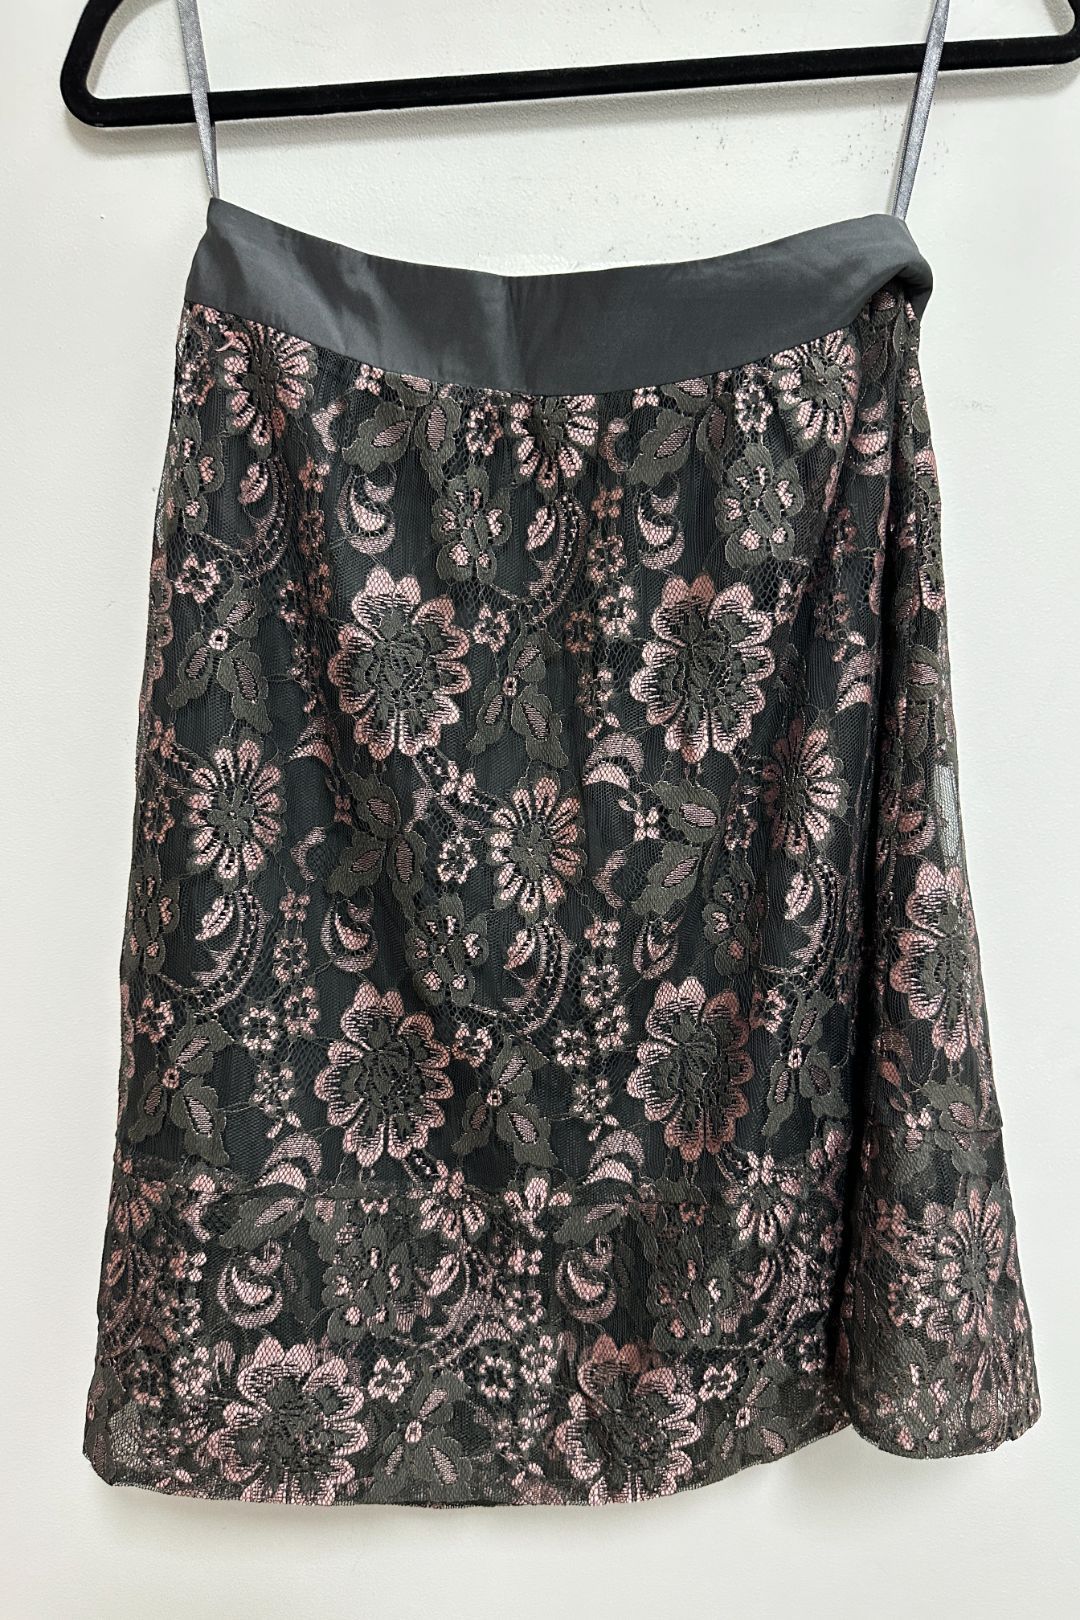 Alannah Hill Grey and Pink Lace Mini Skirt